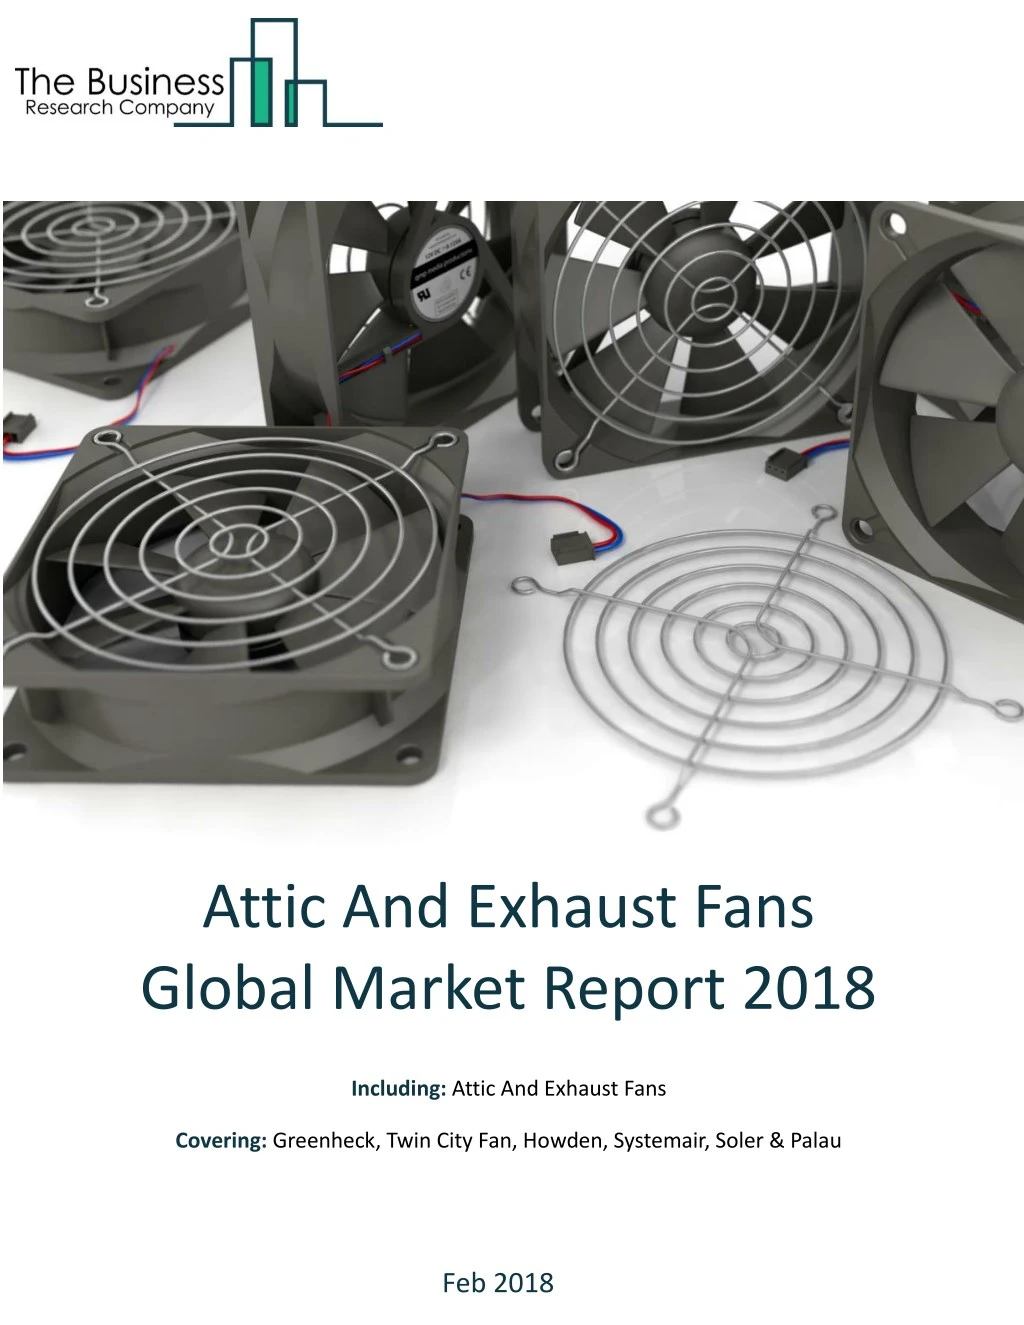 attic and exhaust fans global market report 2018